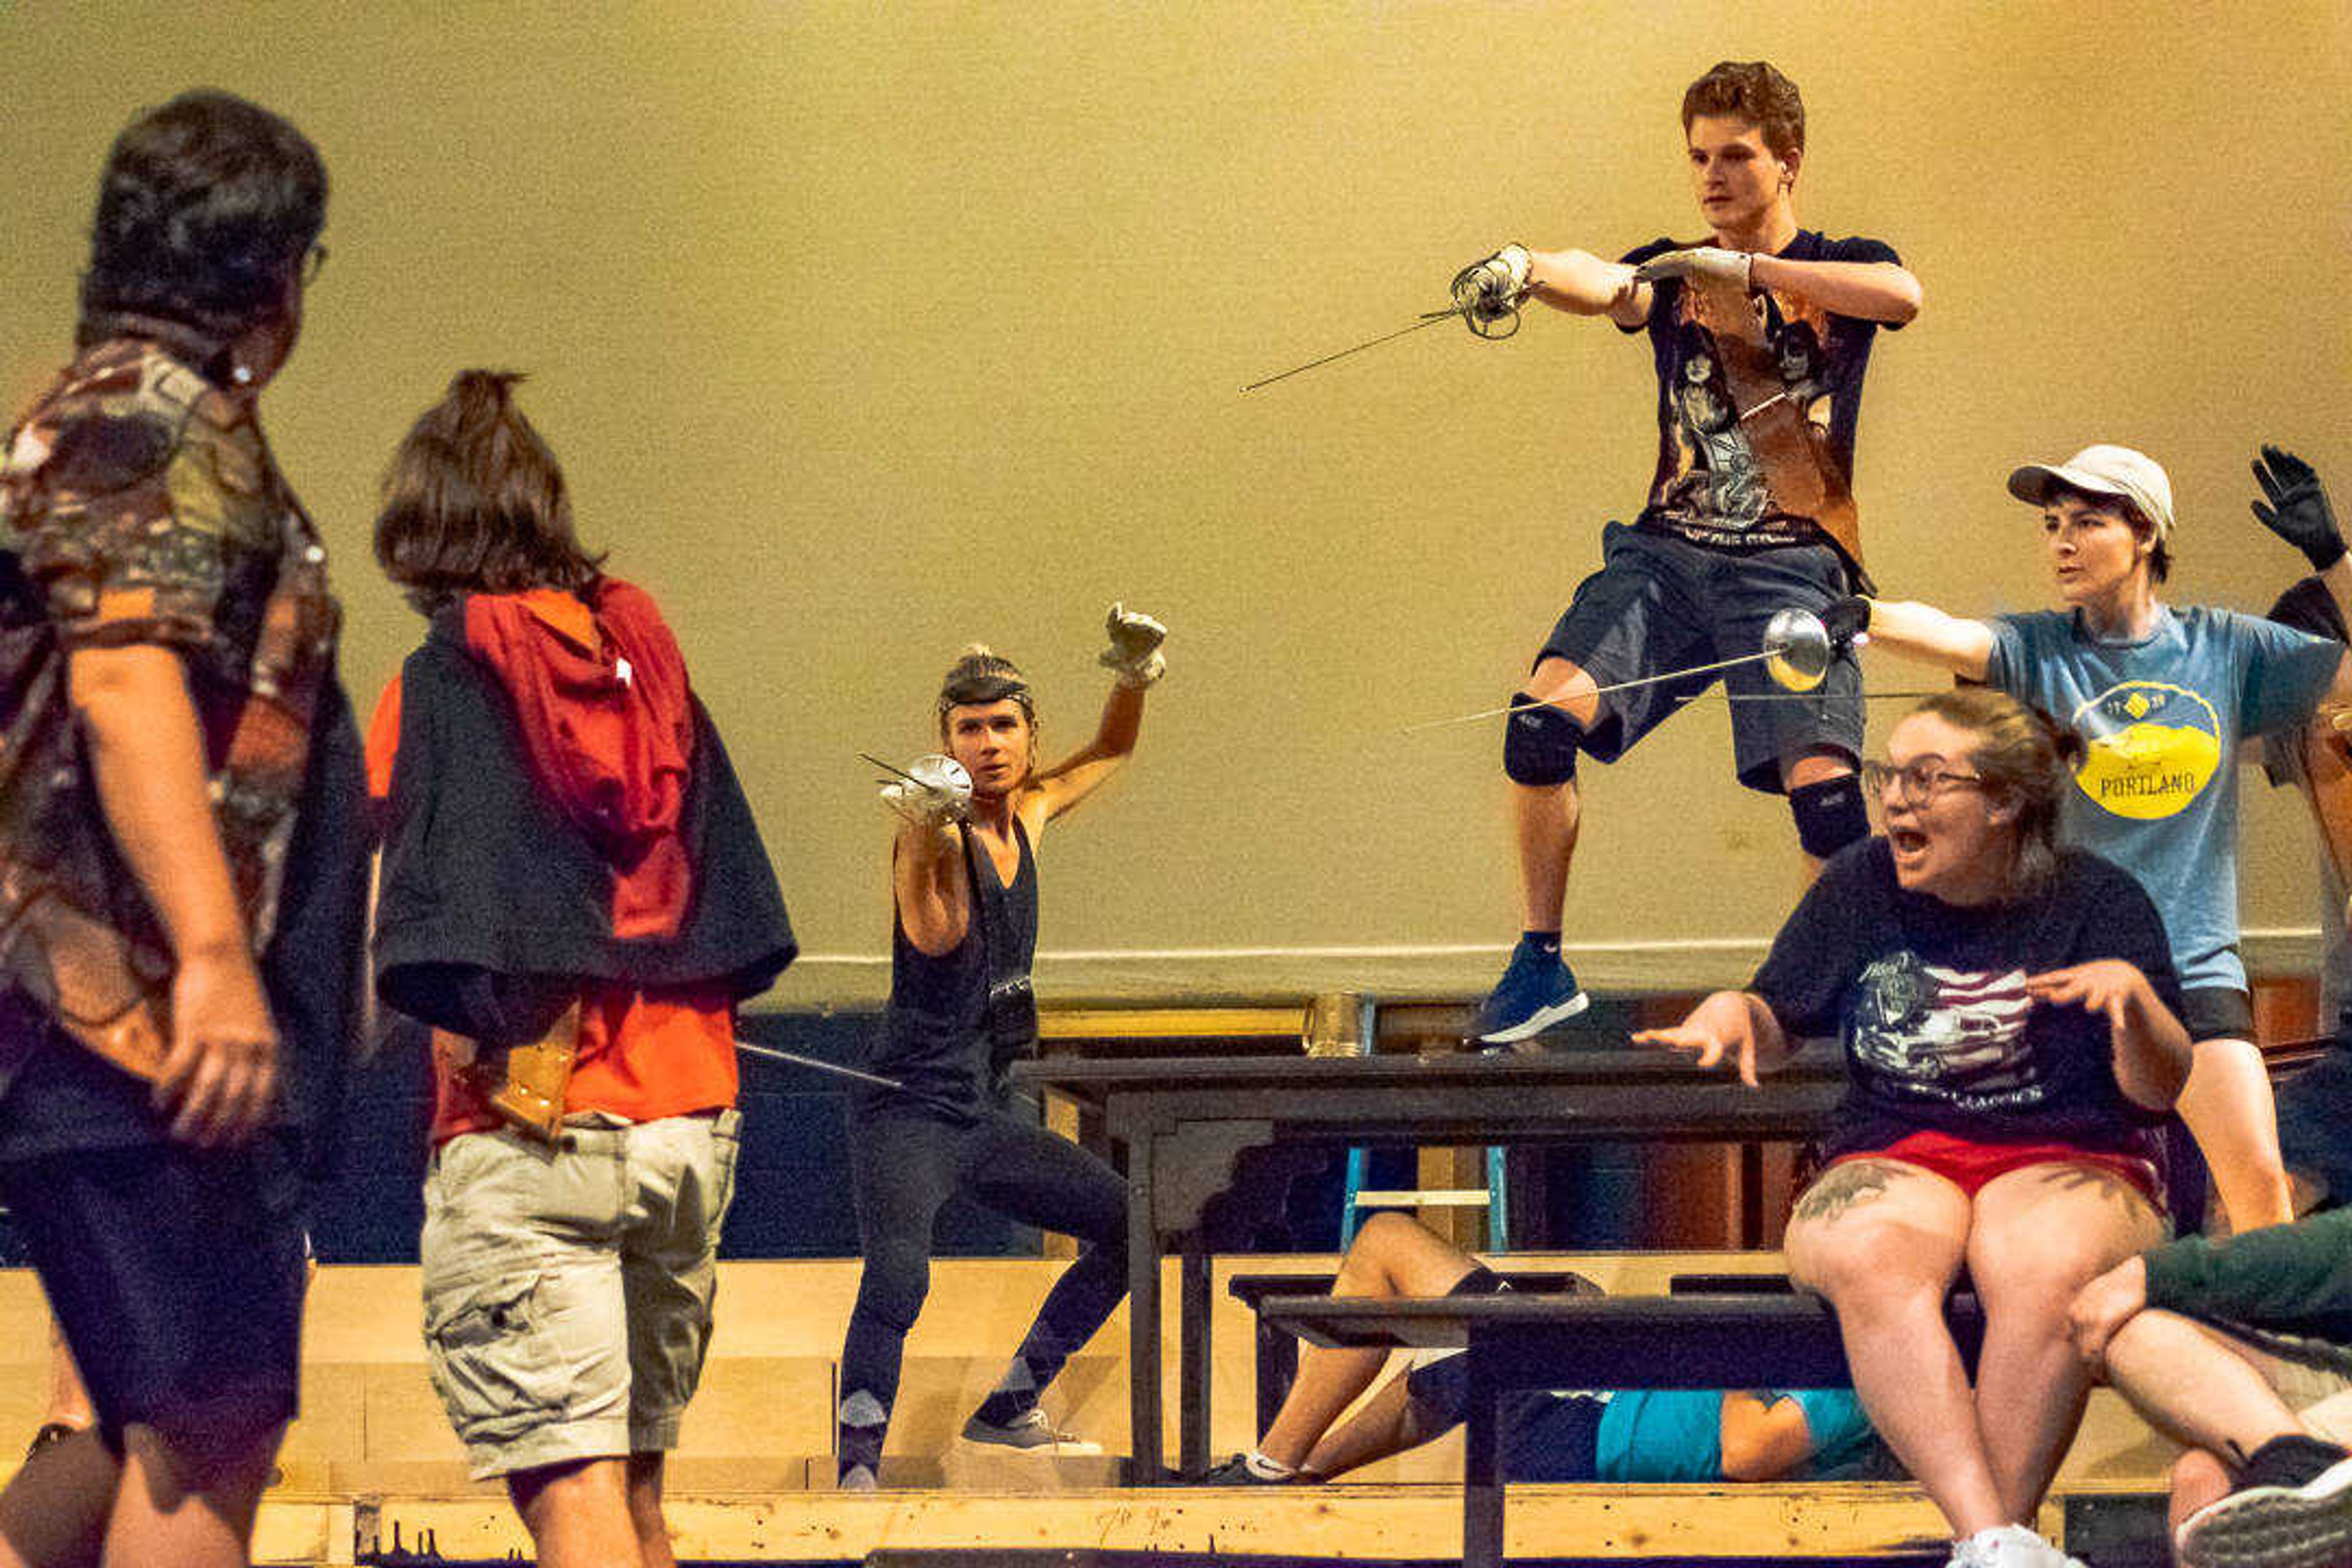 Cast members of Southeast's production of "The Three Musketeers" rehearse one of the many stage fighting scenes during a Sept. 5 dress rehearsal.